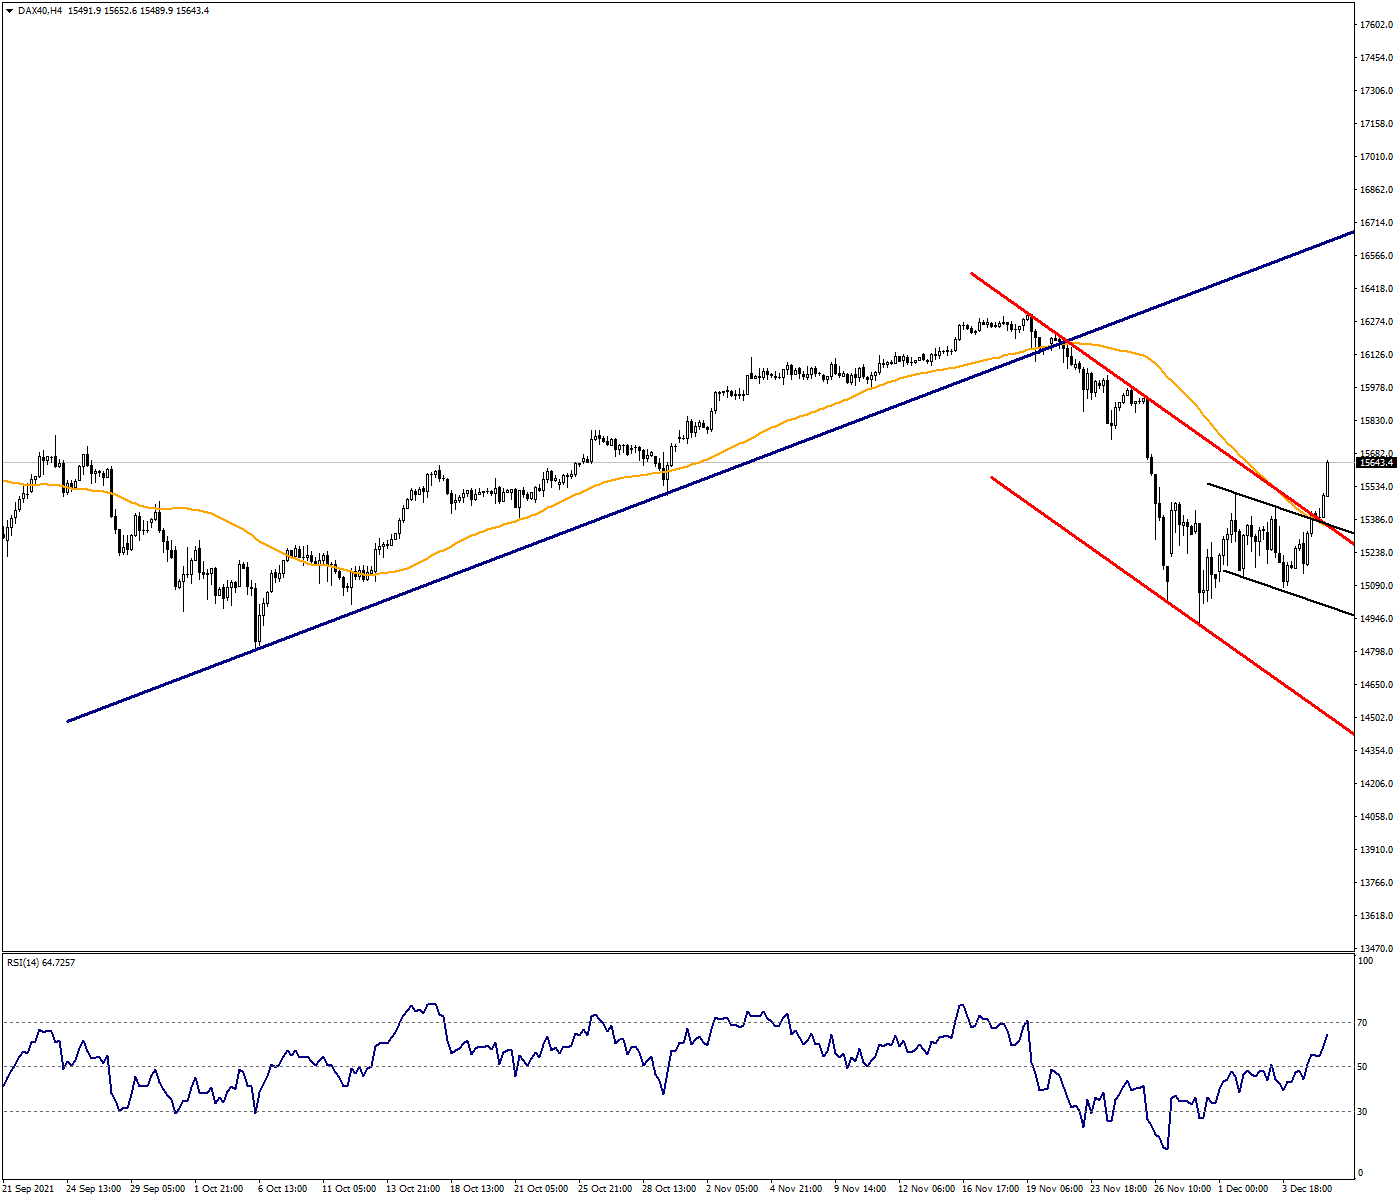 DAX40 is in the recovery path